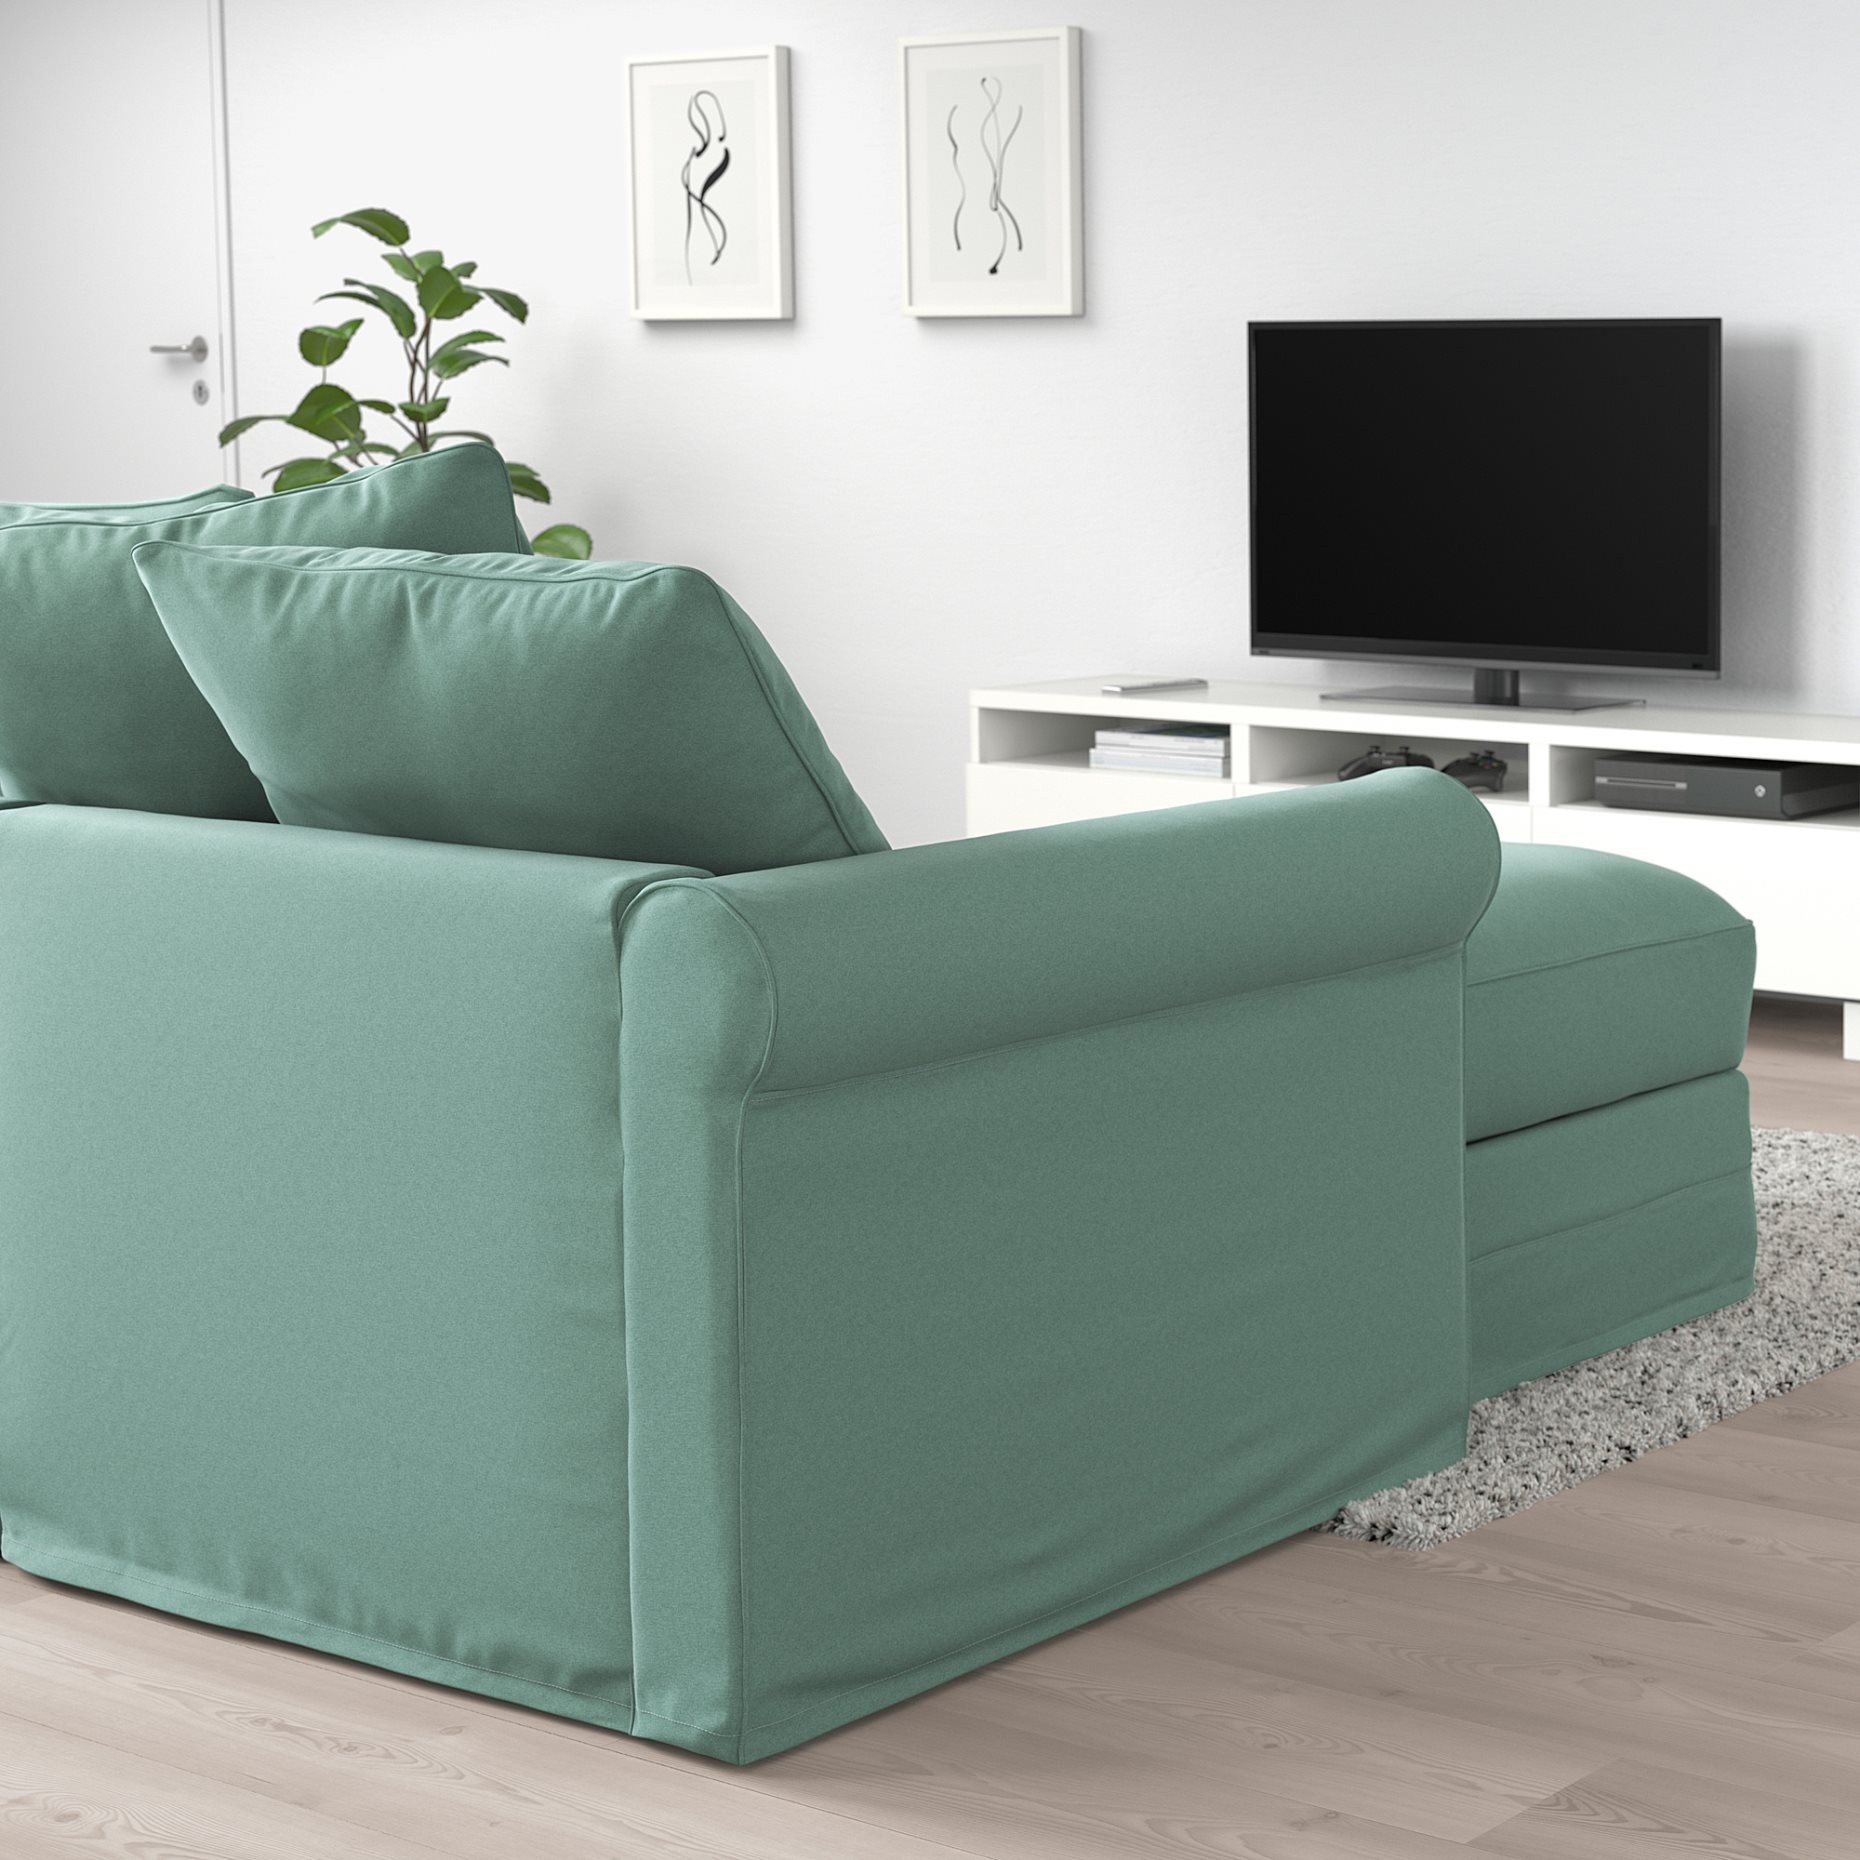 GRÖNLID, 3-seat sofa-bed with chaise longue, 095.366.10